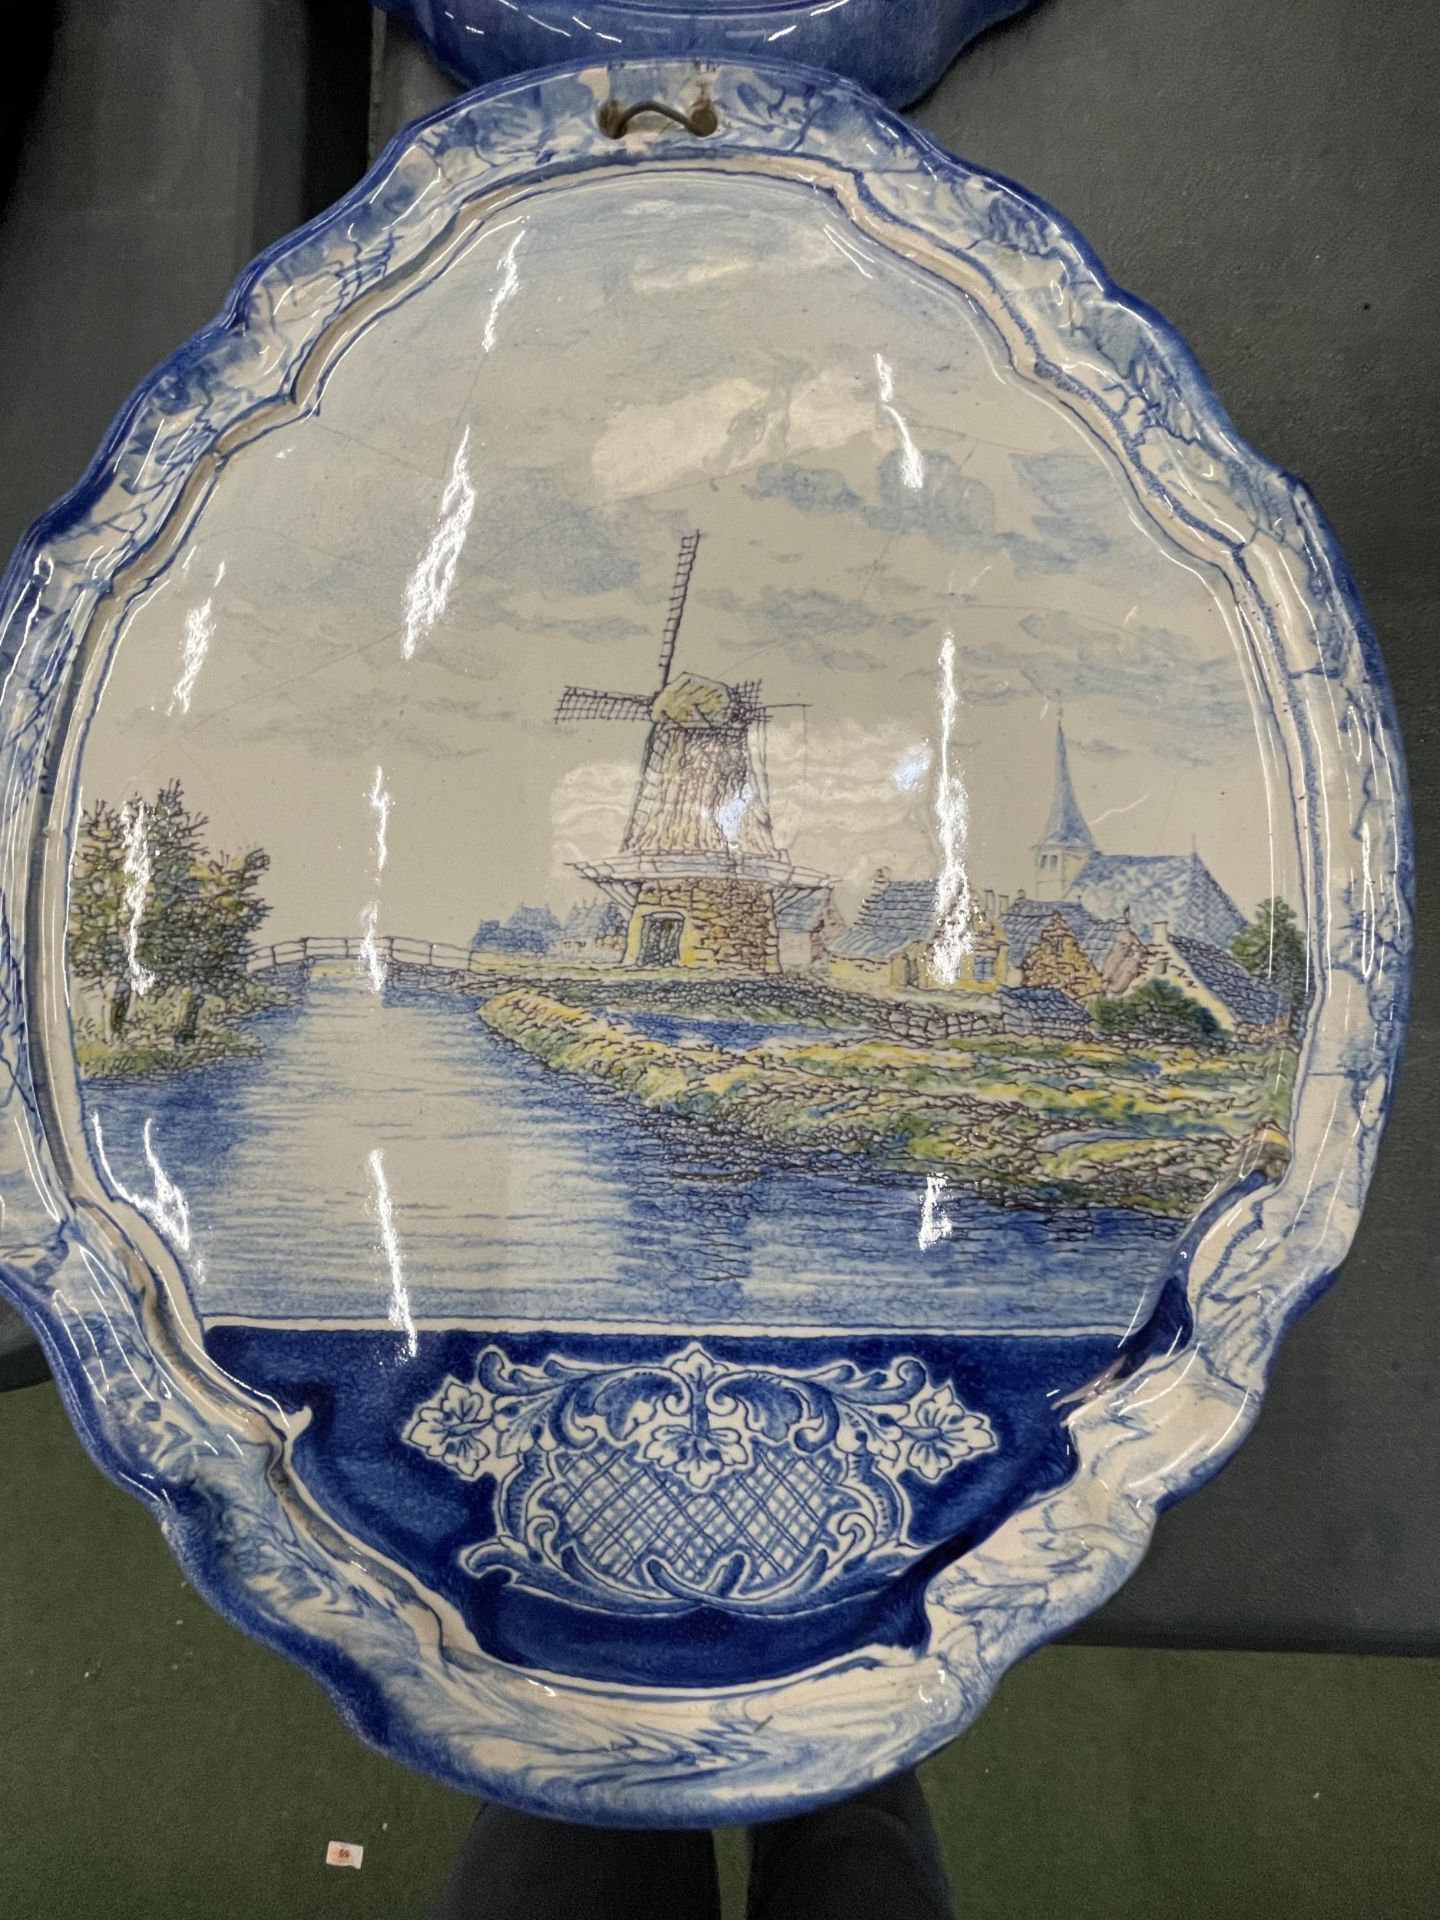 TWO LARGE DELFT WALL PLAQUES WITH WINDMILL SCENES - Image 2 of 4